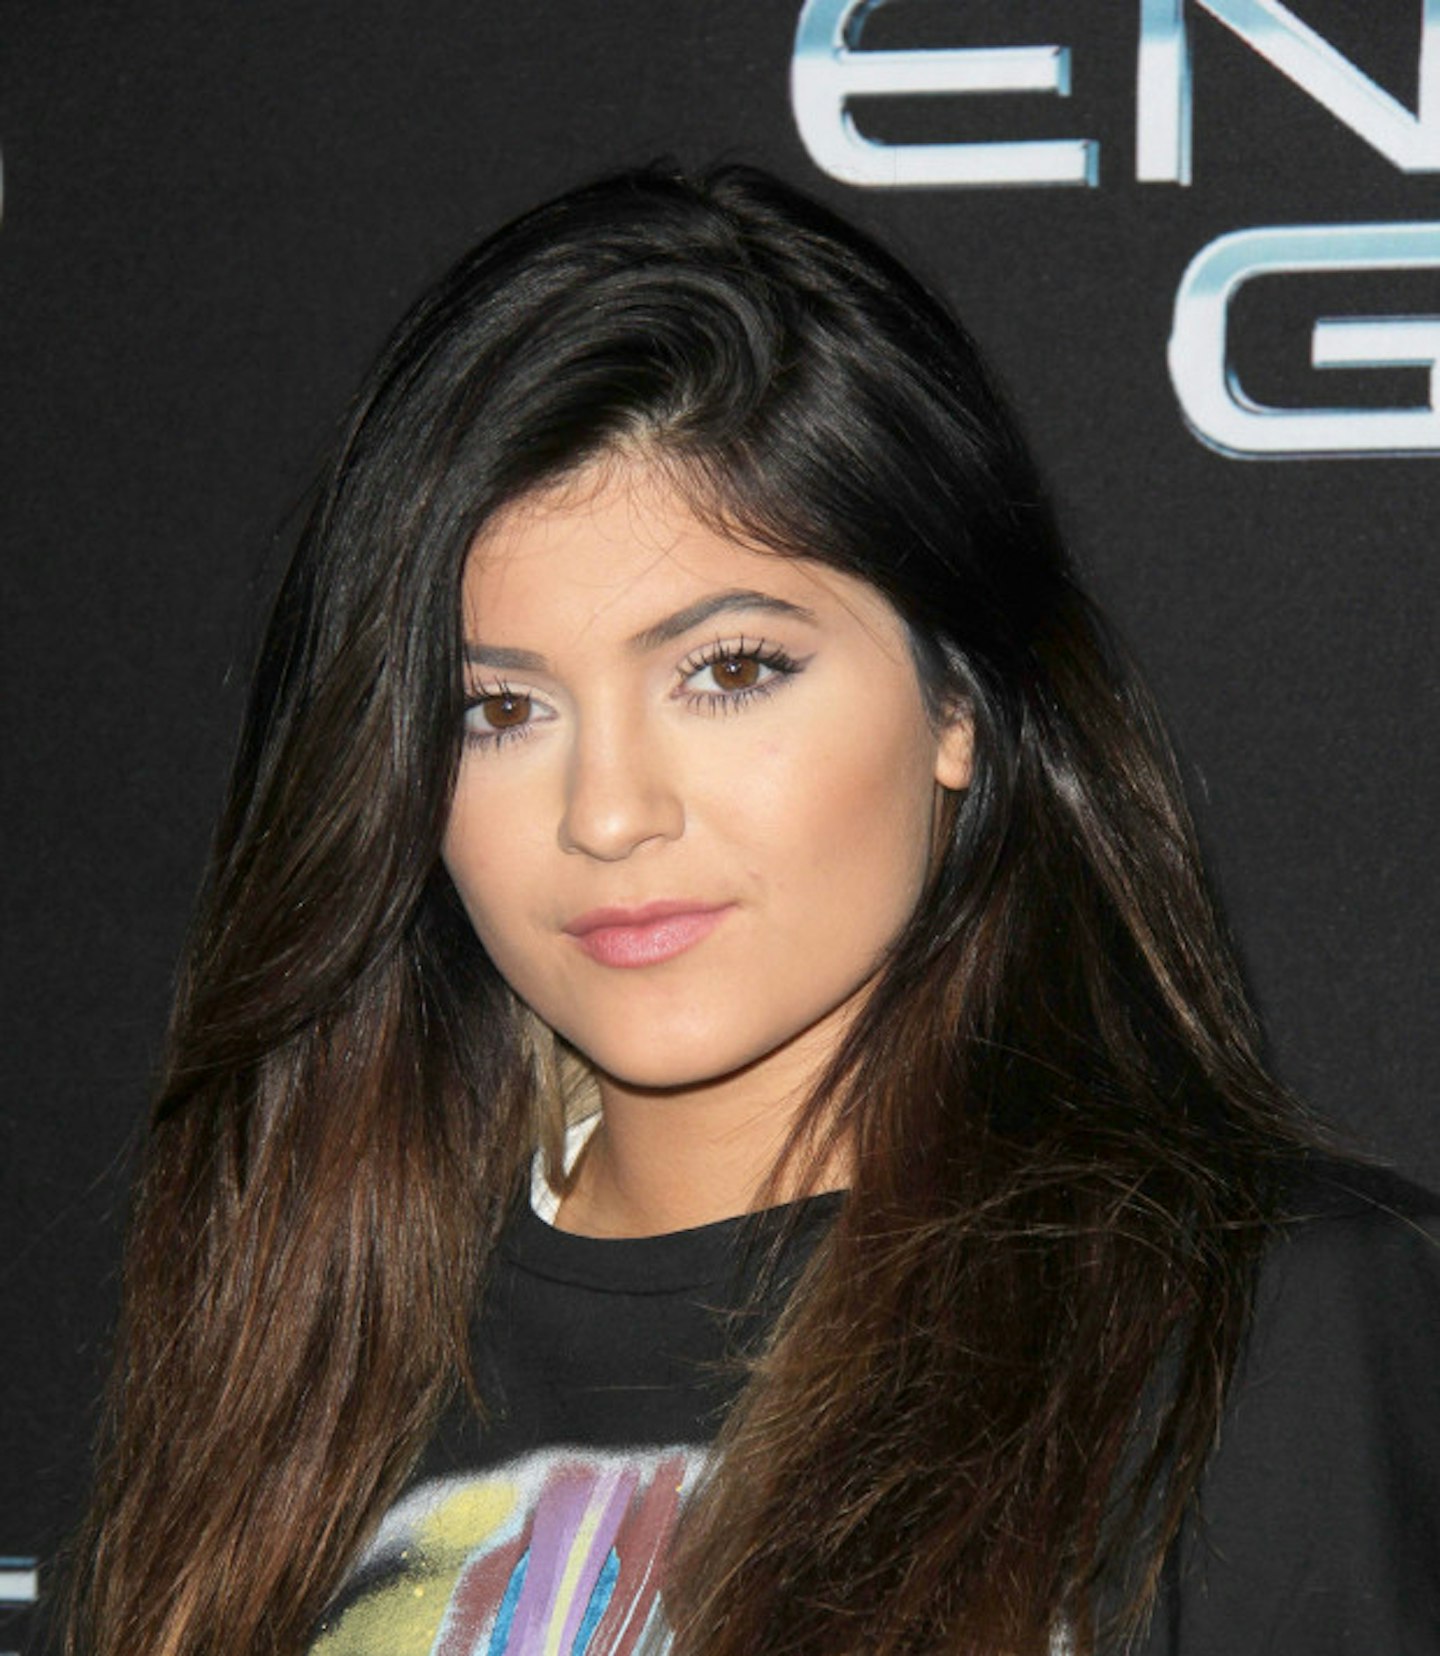 In April 2014 Kylie was 'hurt' by the plastic surgery rumours, when she tweeted: "These plastic surgery rumors hurt my feelings to be honest and are kinda insulting.